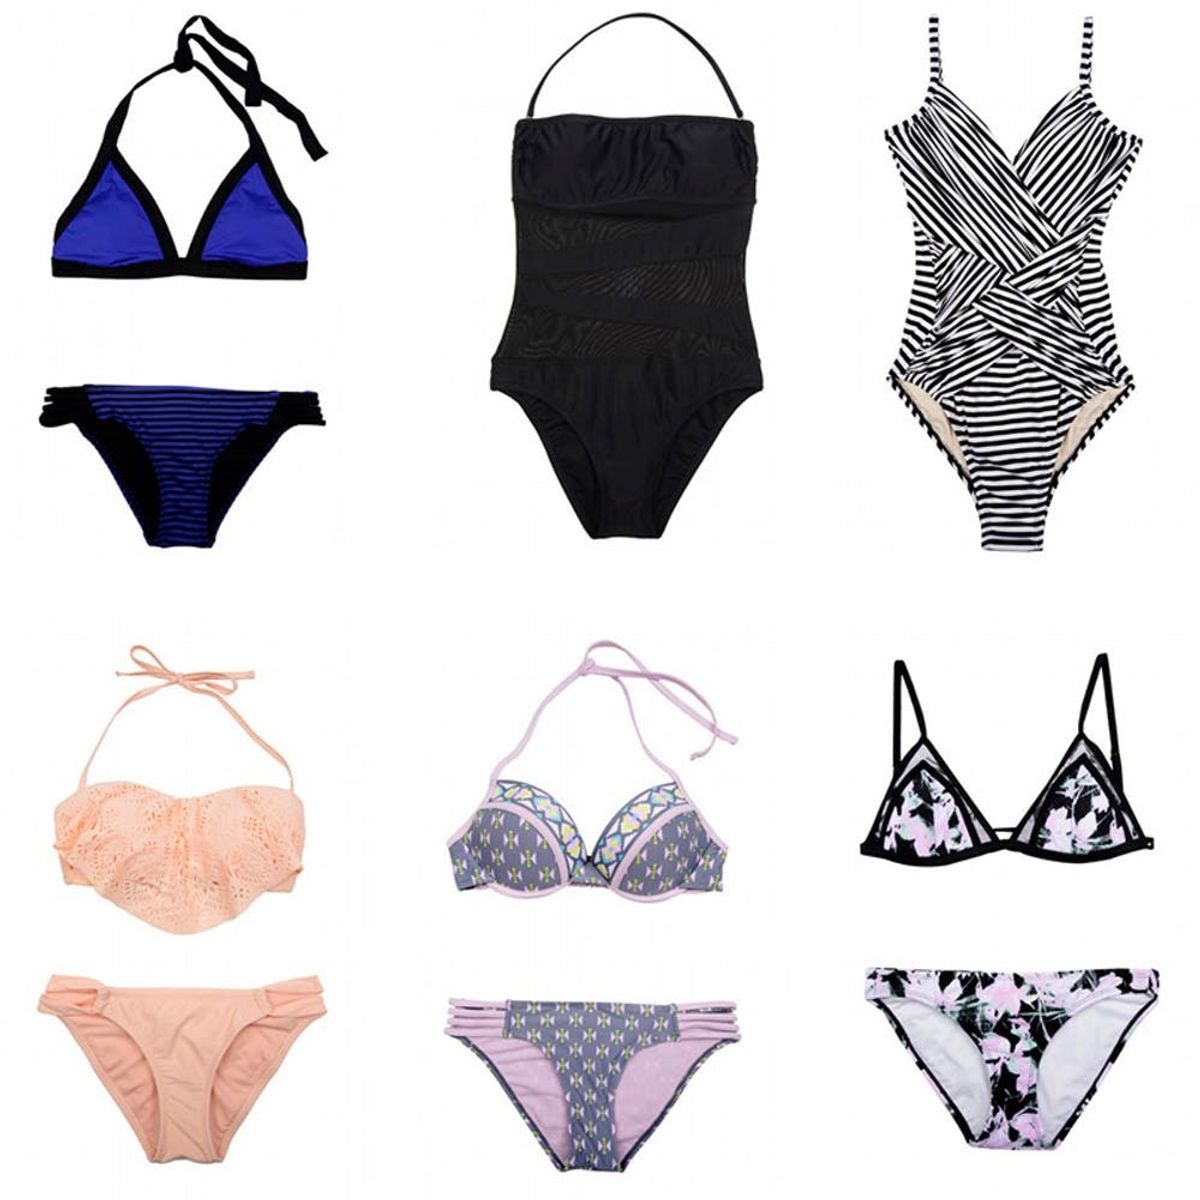 Target’s New Swimwear Collection Will Make You So Excited for Spring Break